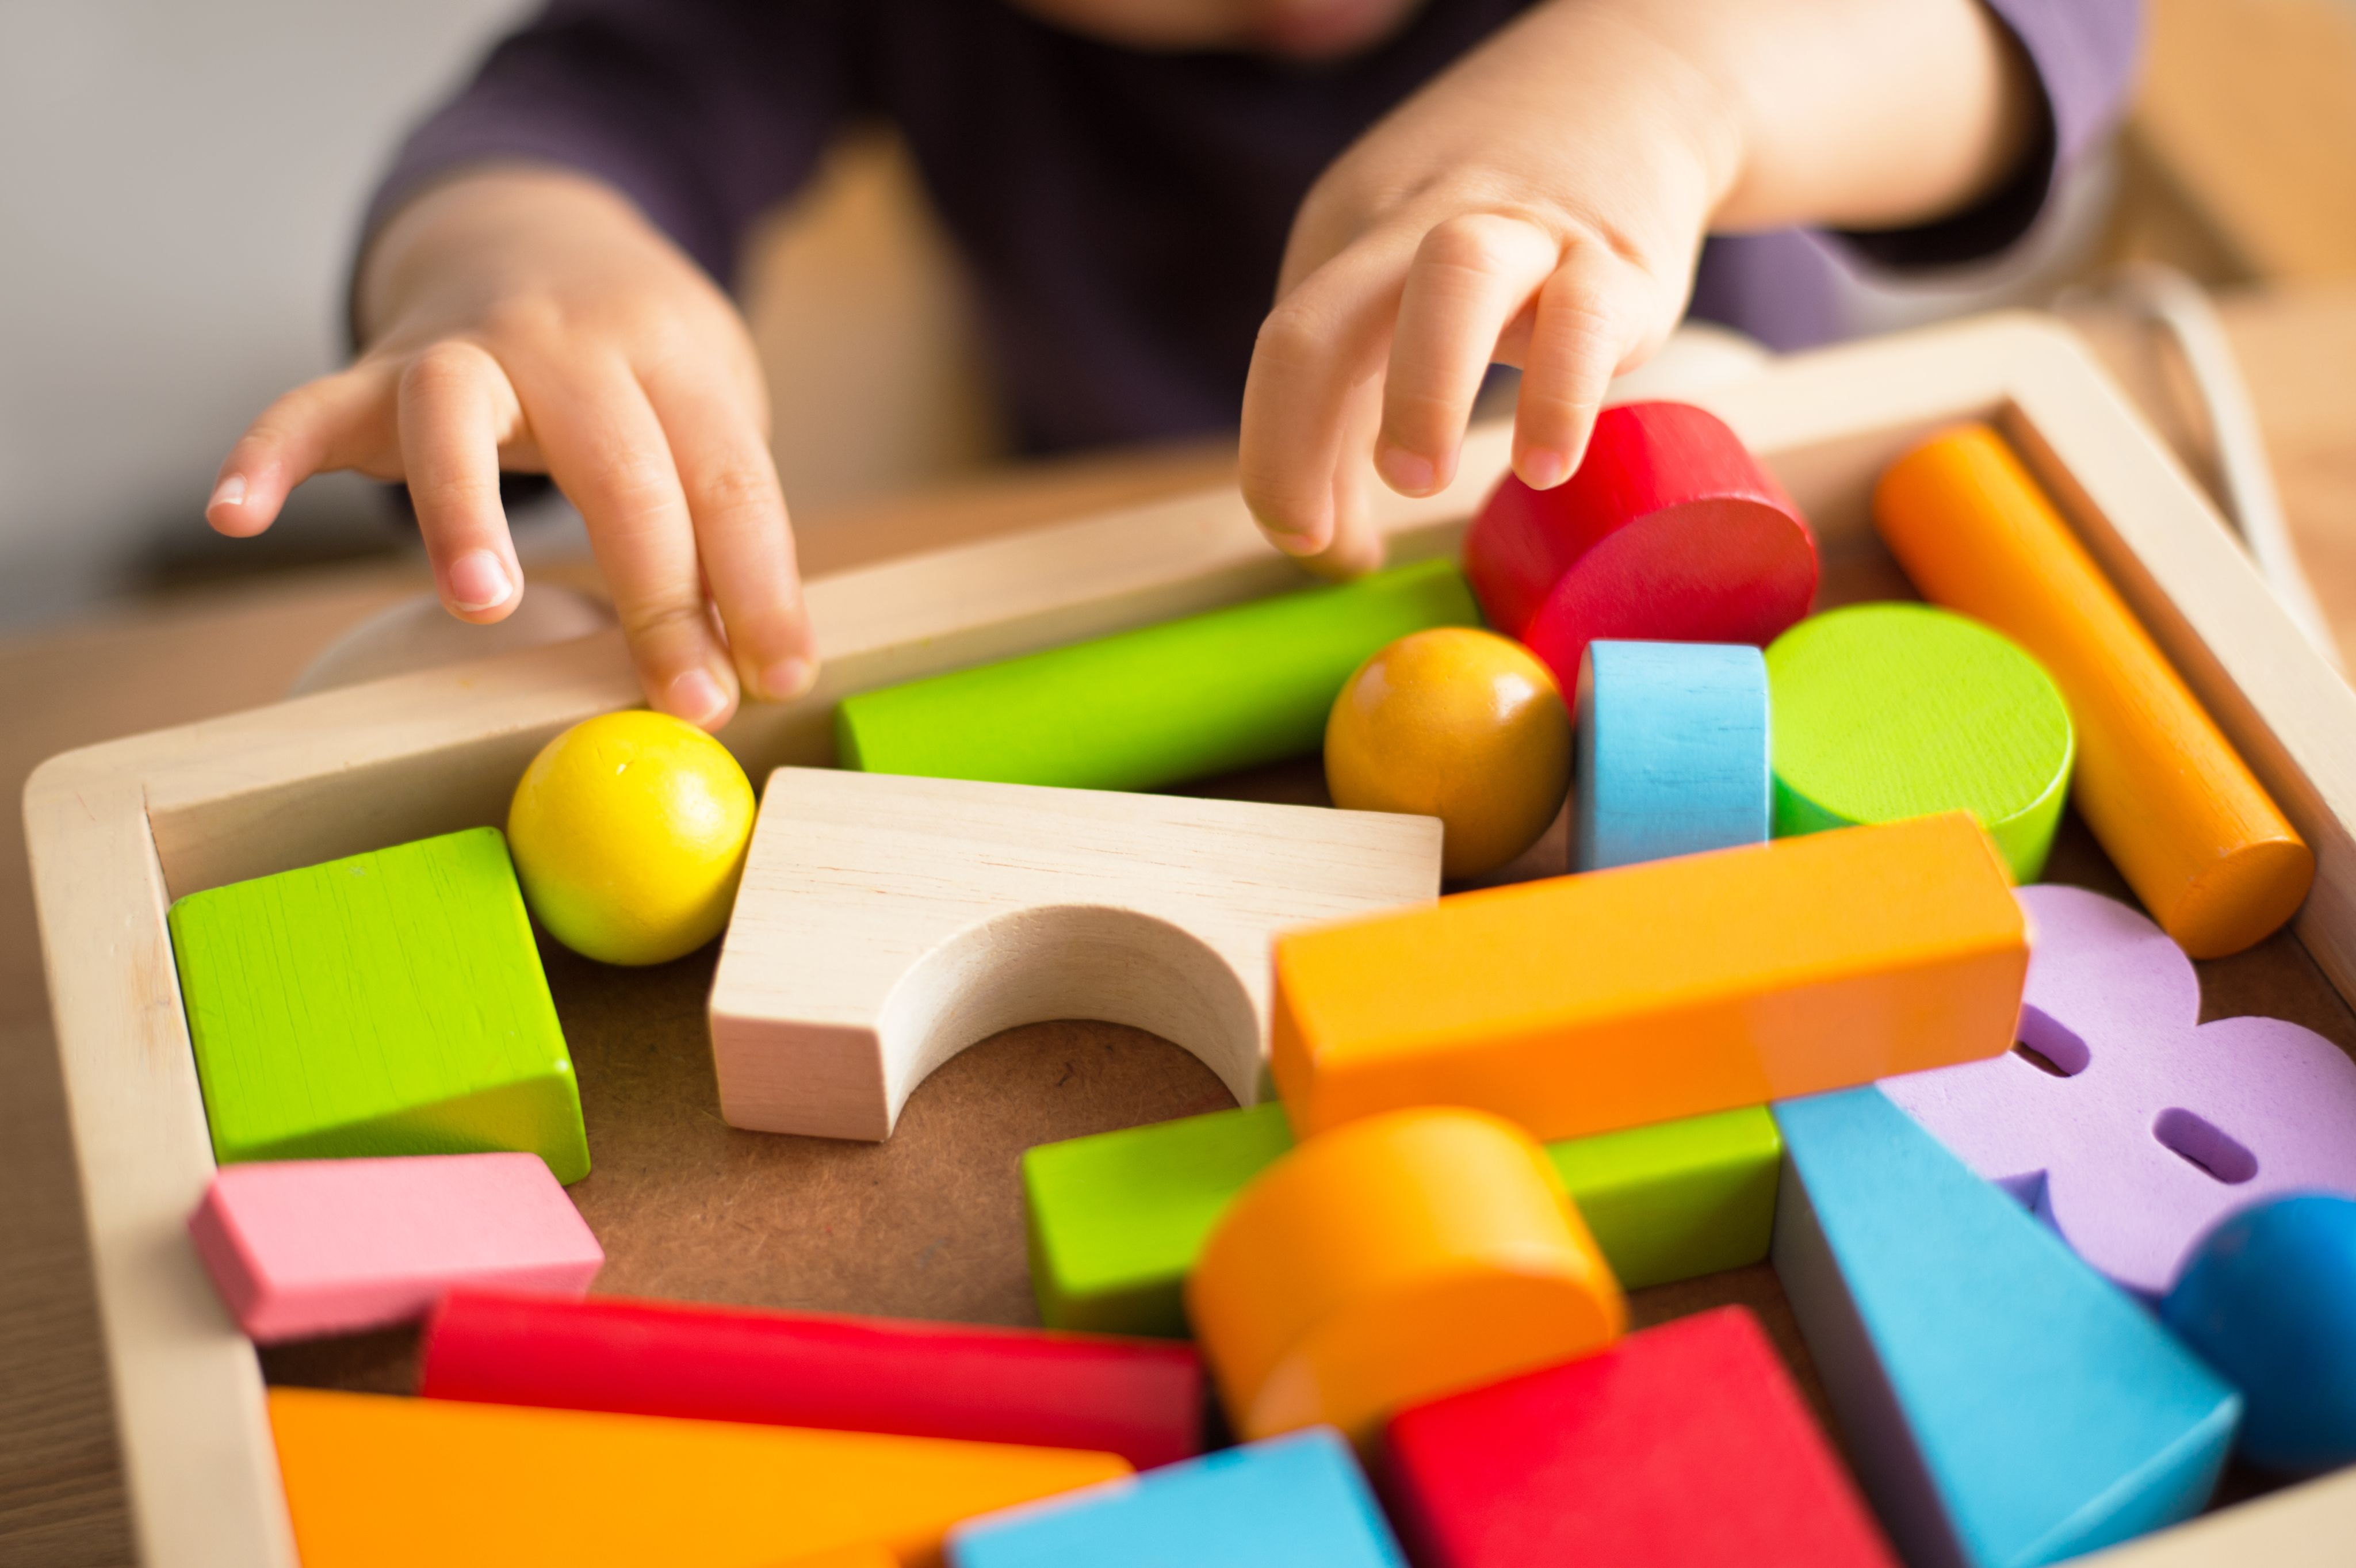 Image of a child's hands playing with wooden toy pieces